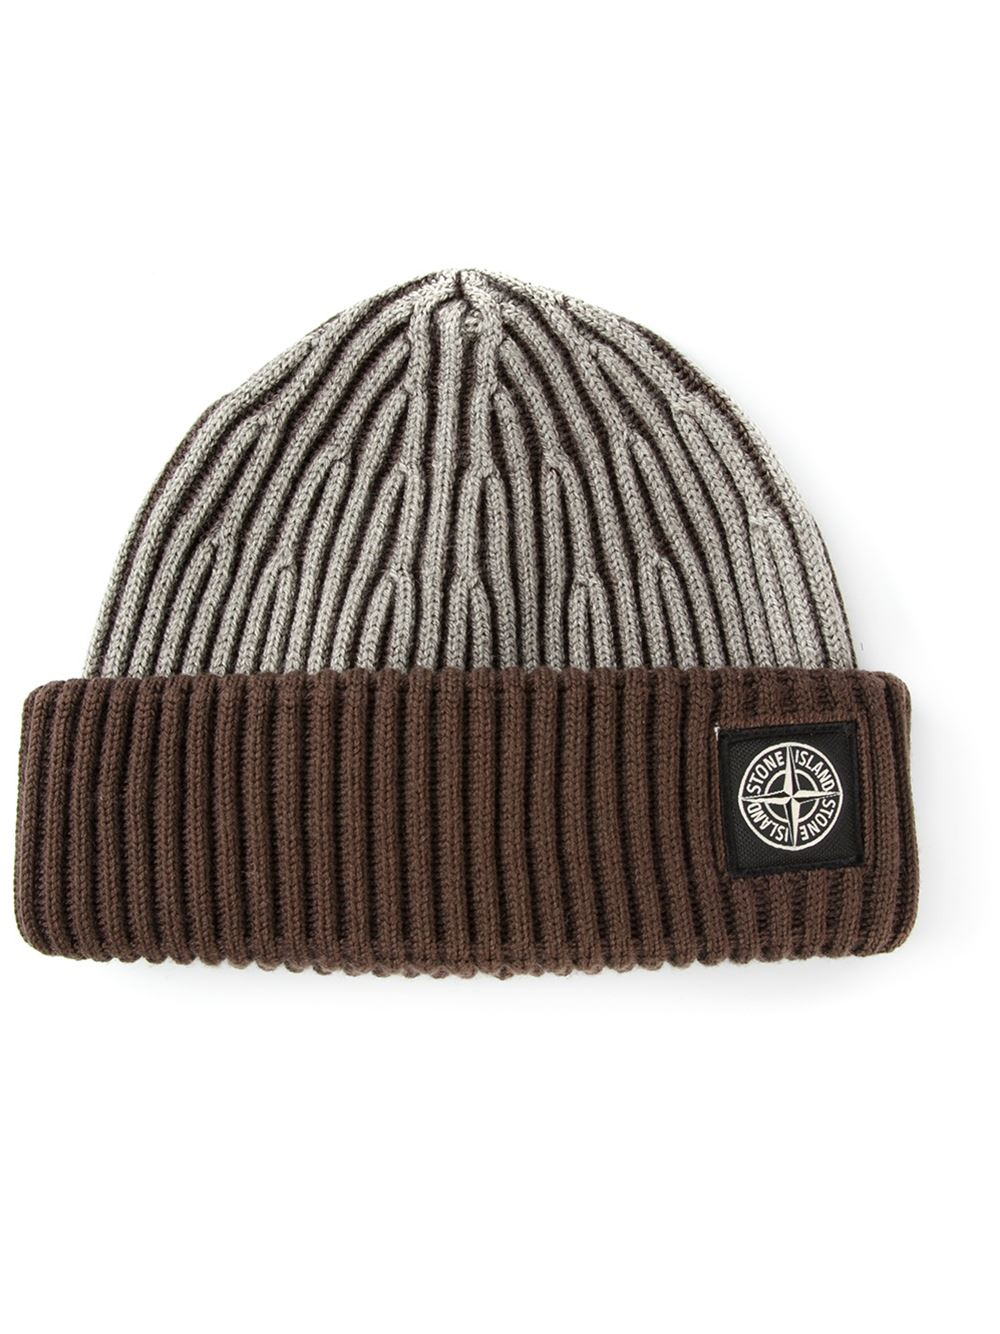 Stone Island Ribbed Beanie in Brown for Men - Lyst